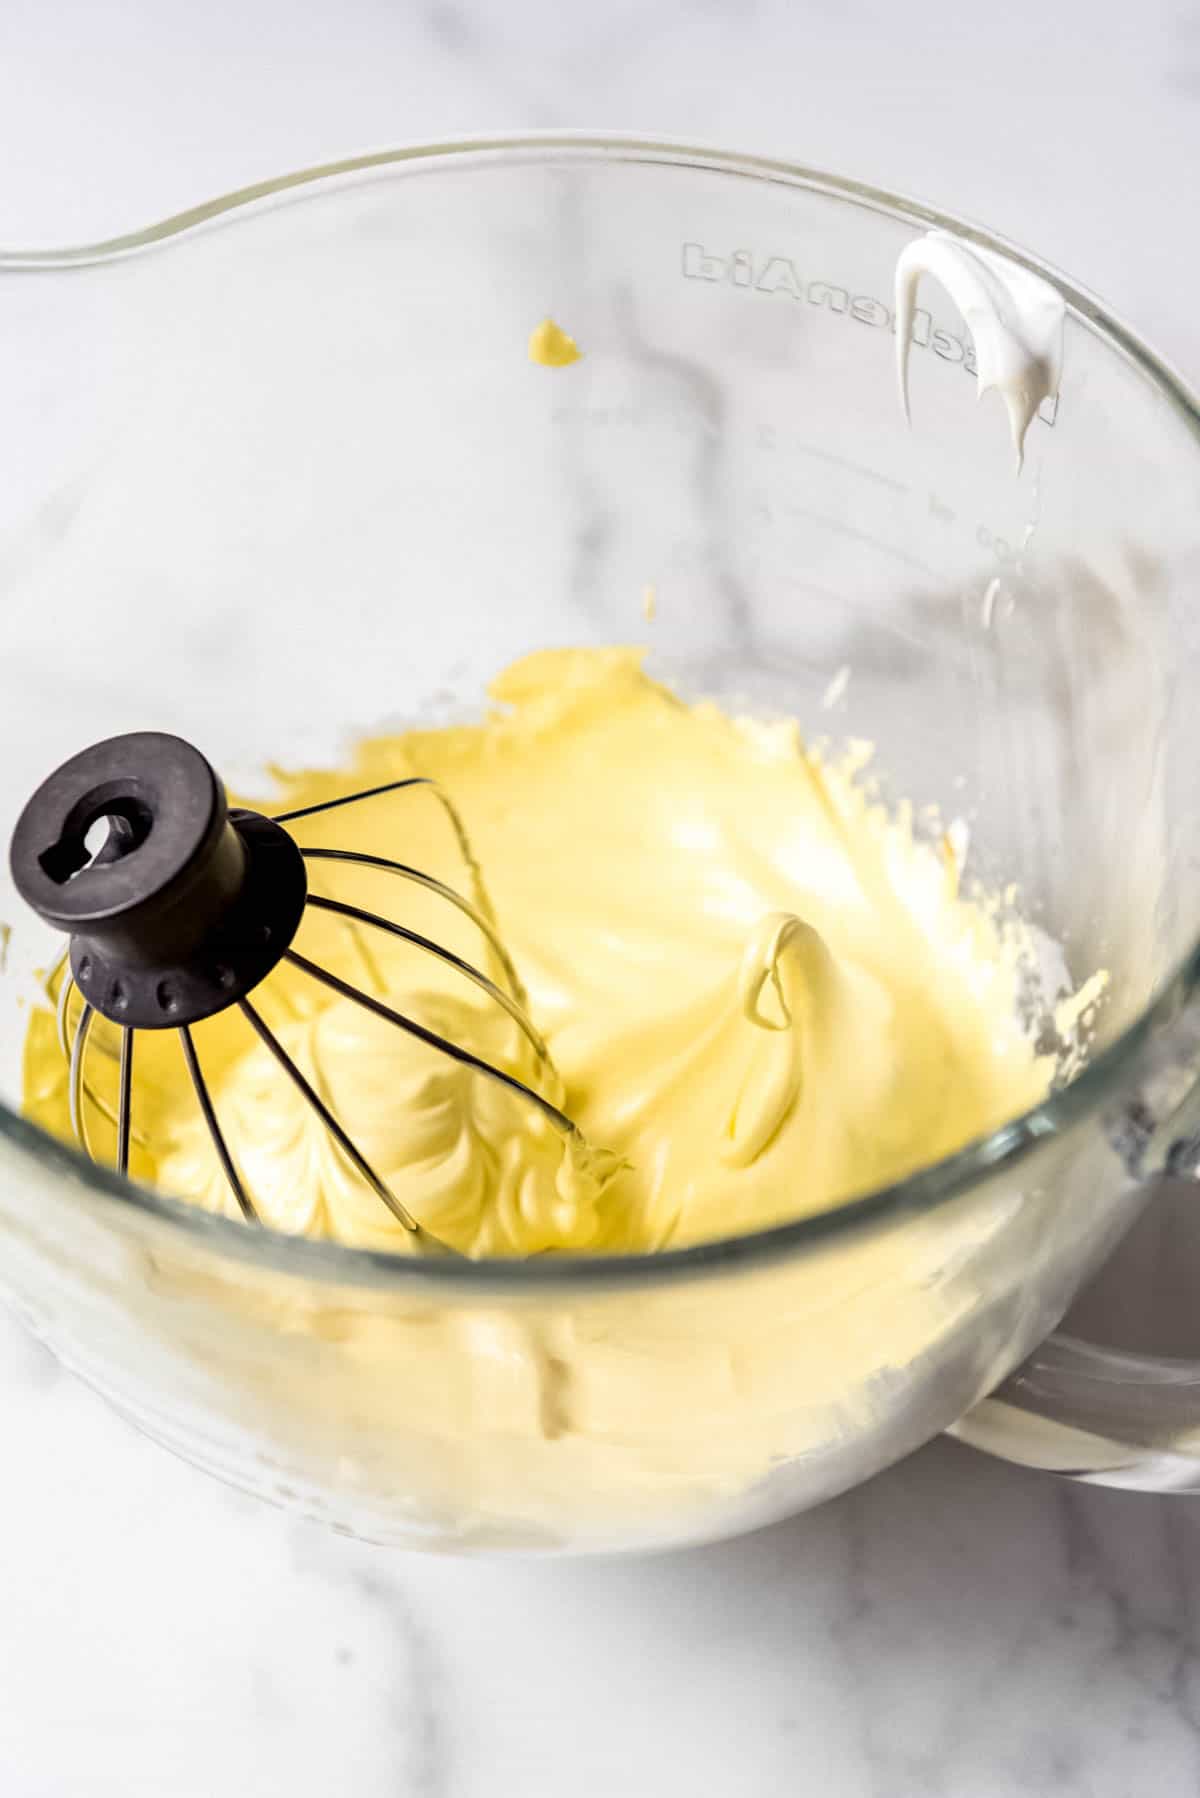 An image of egg whites whisked into stiff peaks and dyed yellow.